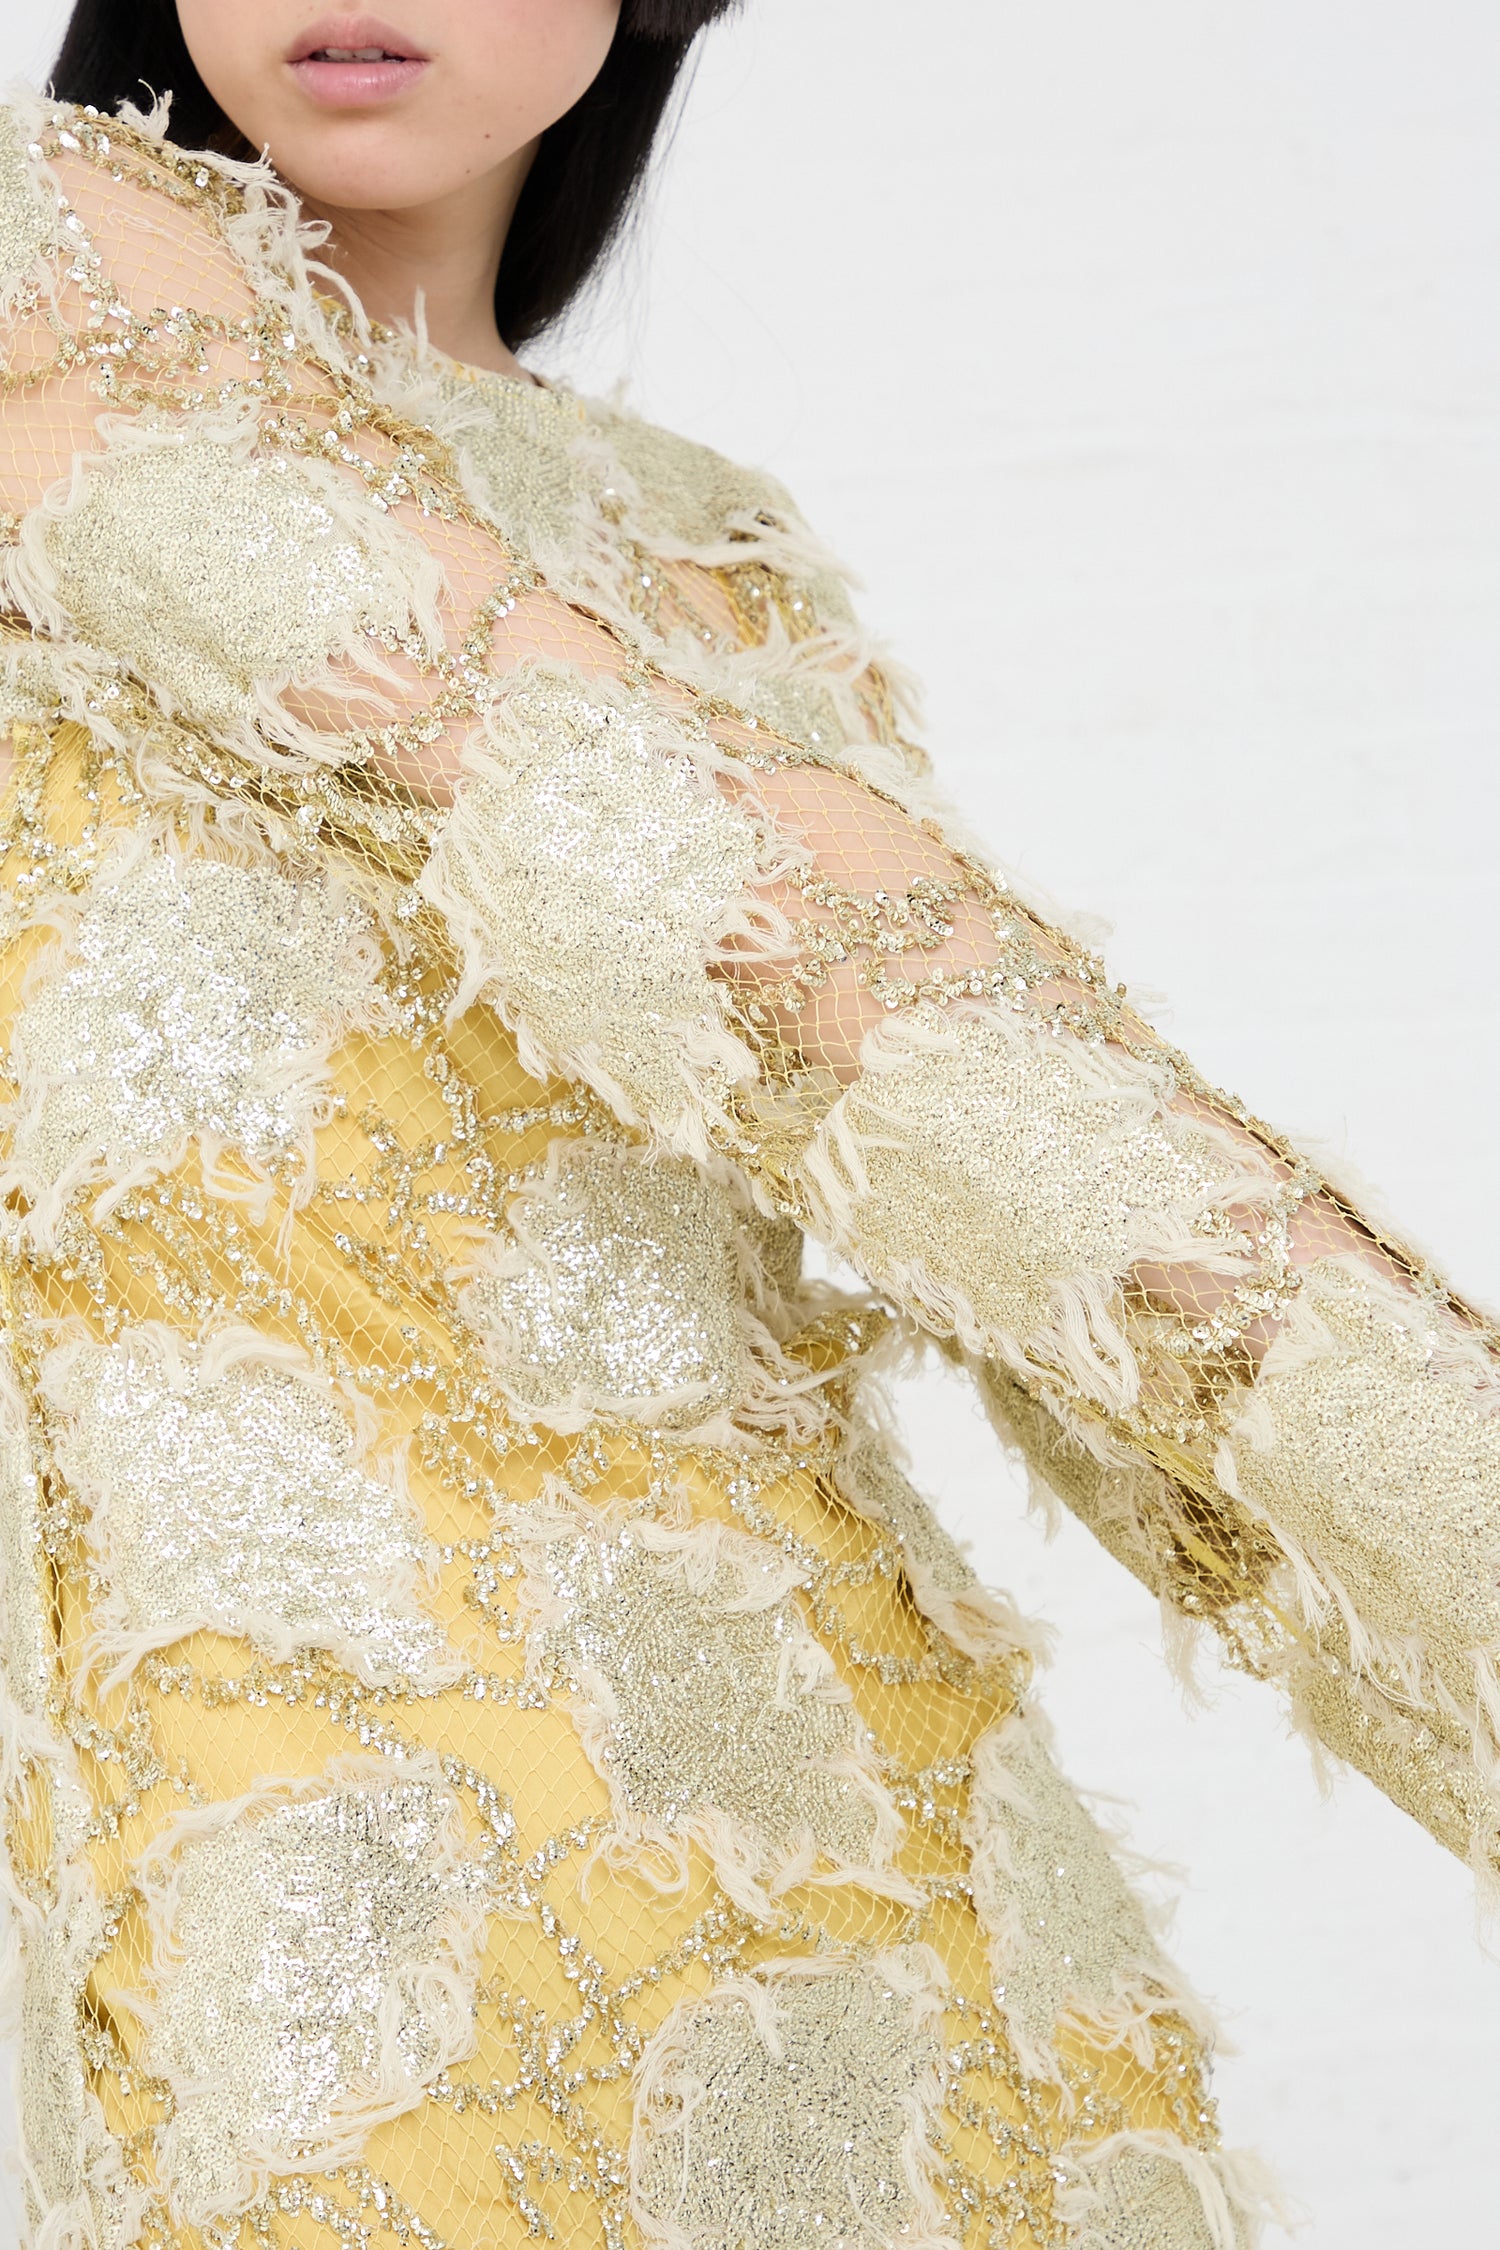 A close-up of a woman in a Rachel Comey Silla Dress in Gold with fringe details.